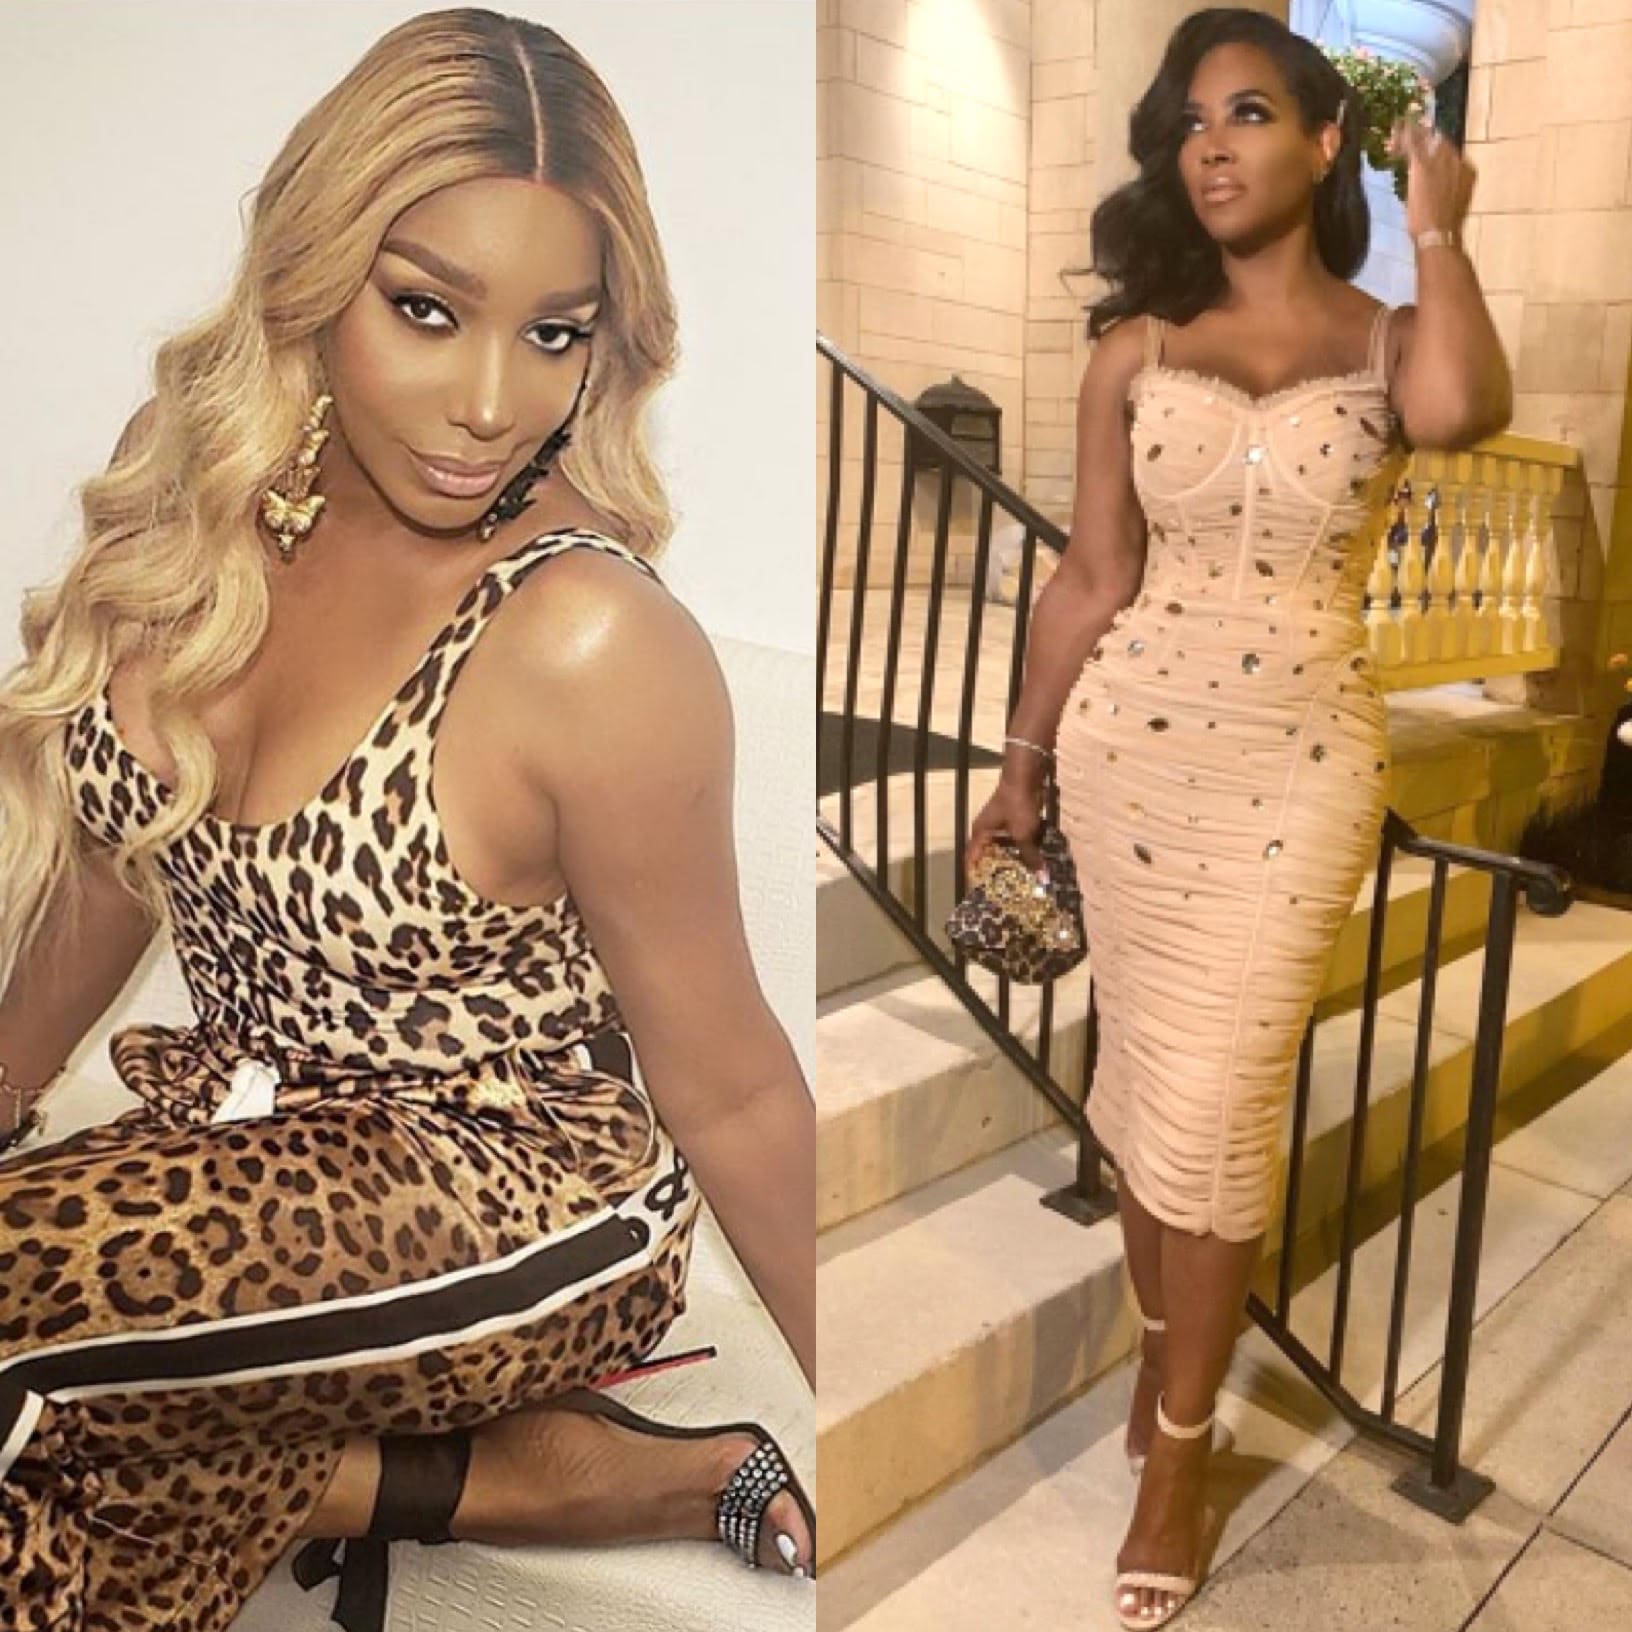 NeNe Leakes Is Trying To Find Three Nice Things To Say About Kenya Moore - See The Video